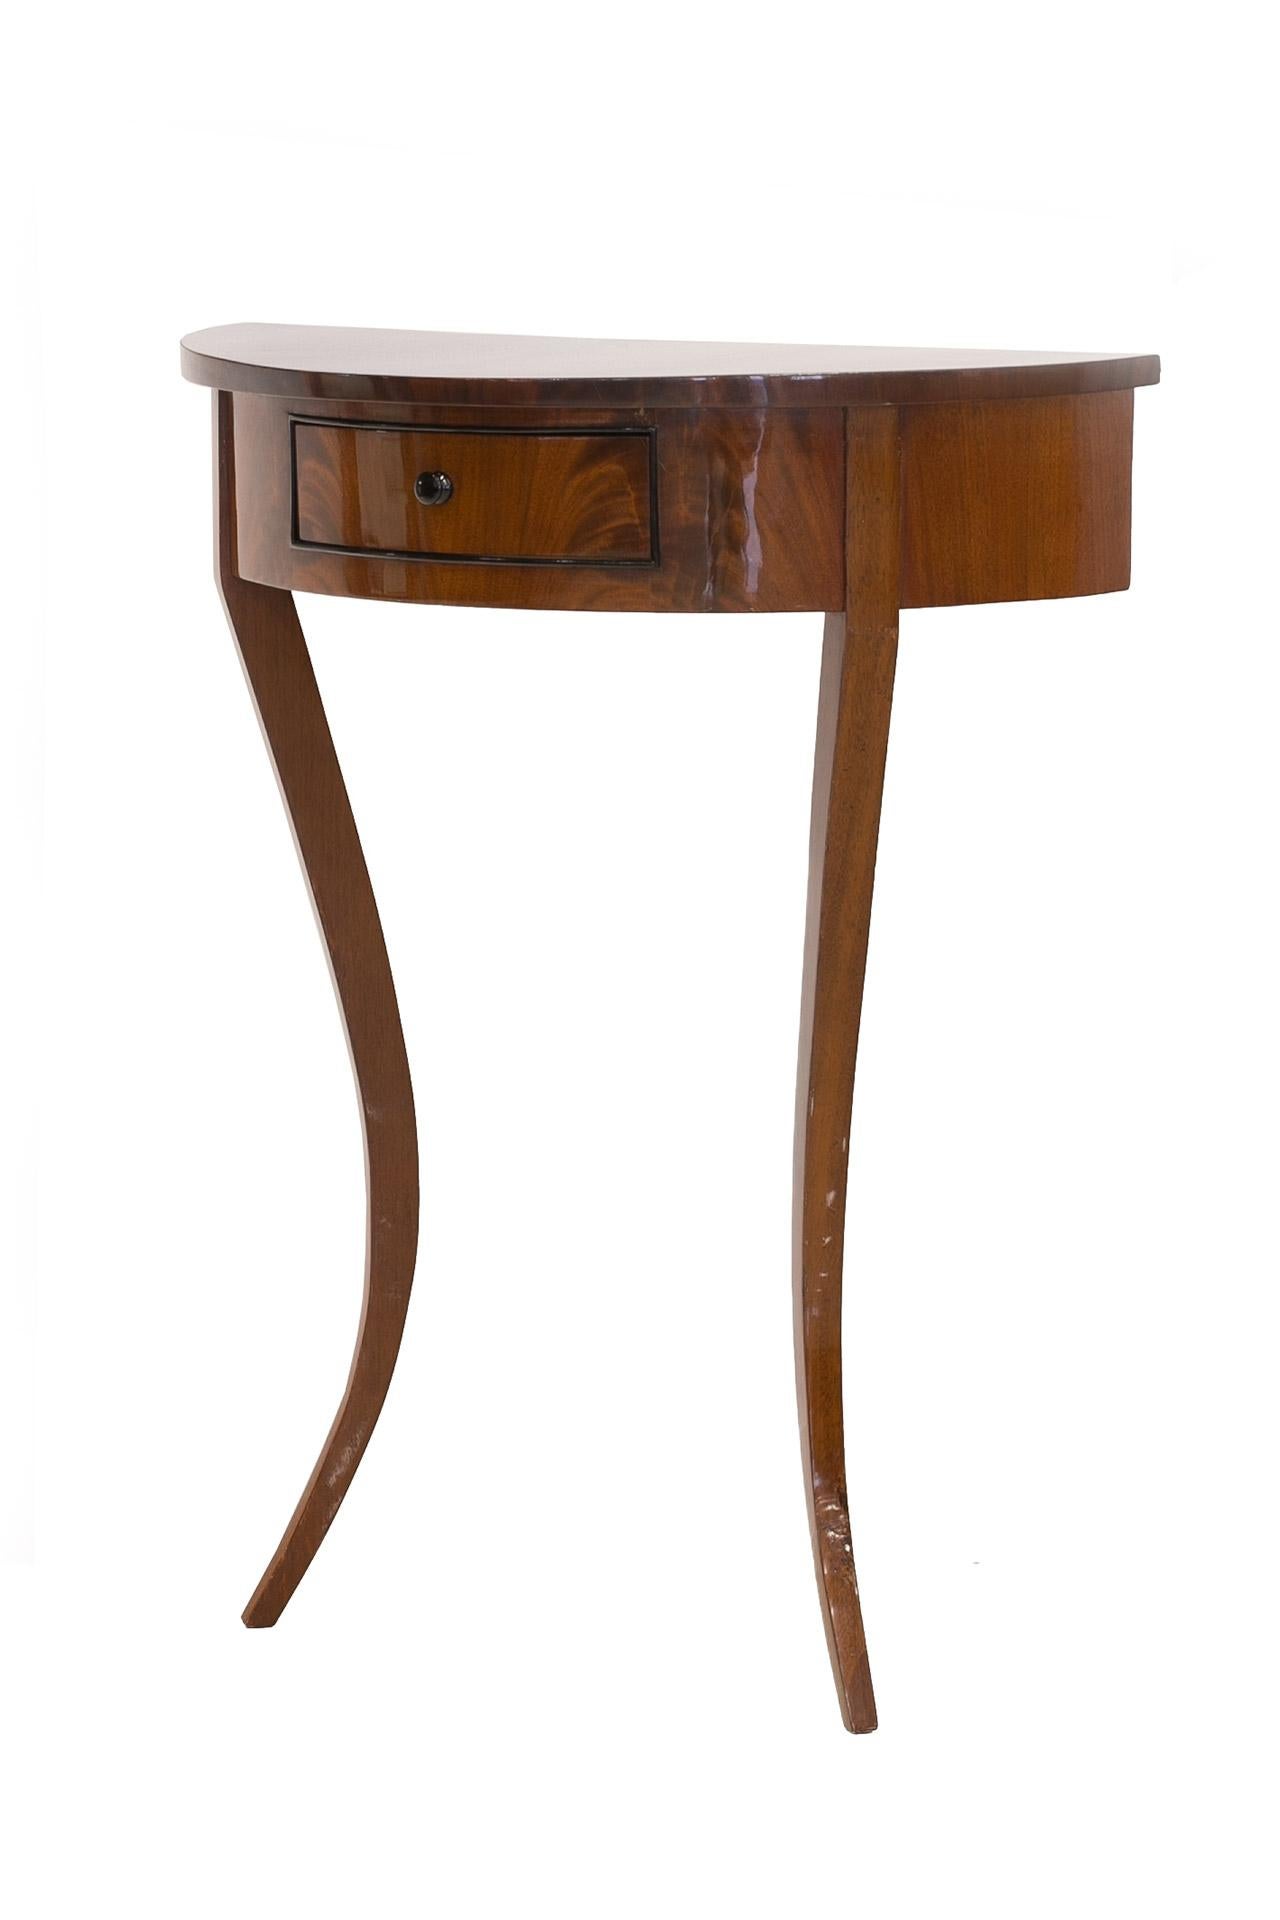 This side table was made in Germany in the first half of the 19th century. The table is supported on 2 bentwood legs and features one practical drawer. It is finished with mahogany veneer and is in excellent condition after a careful renovation. The